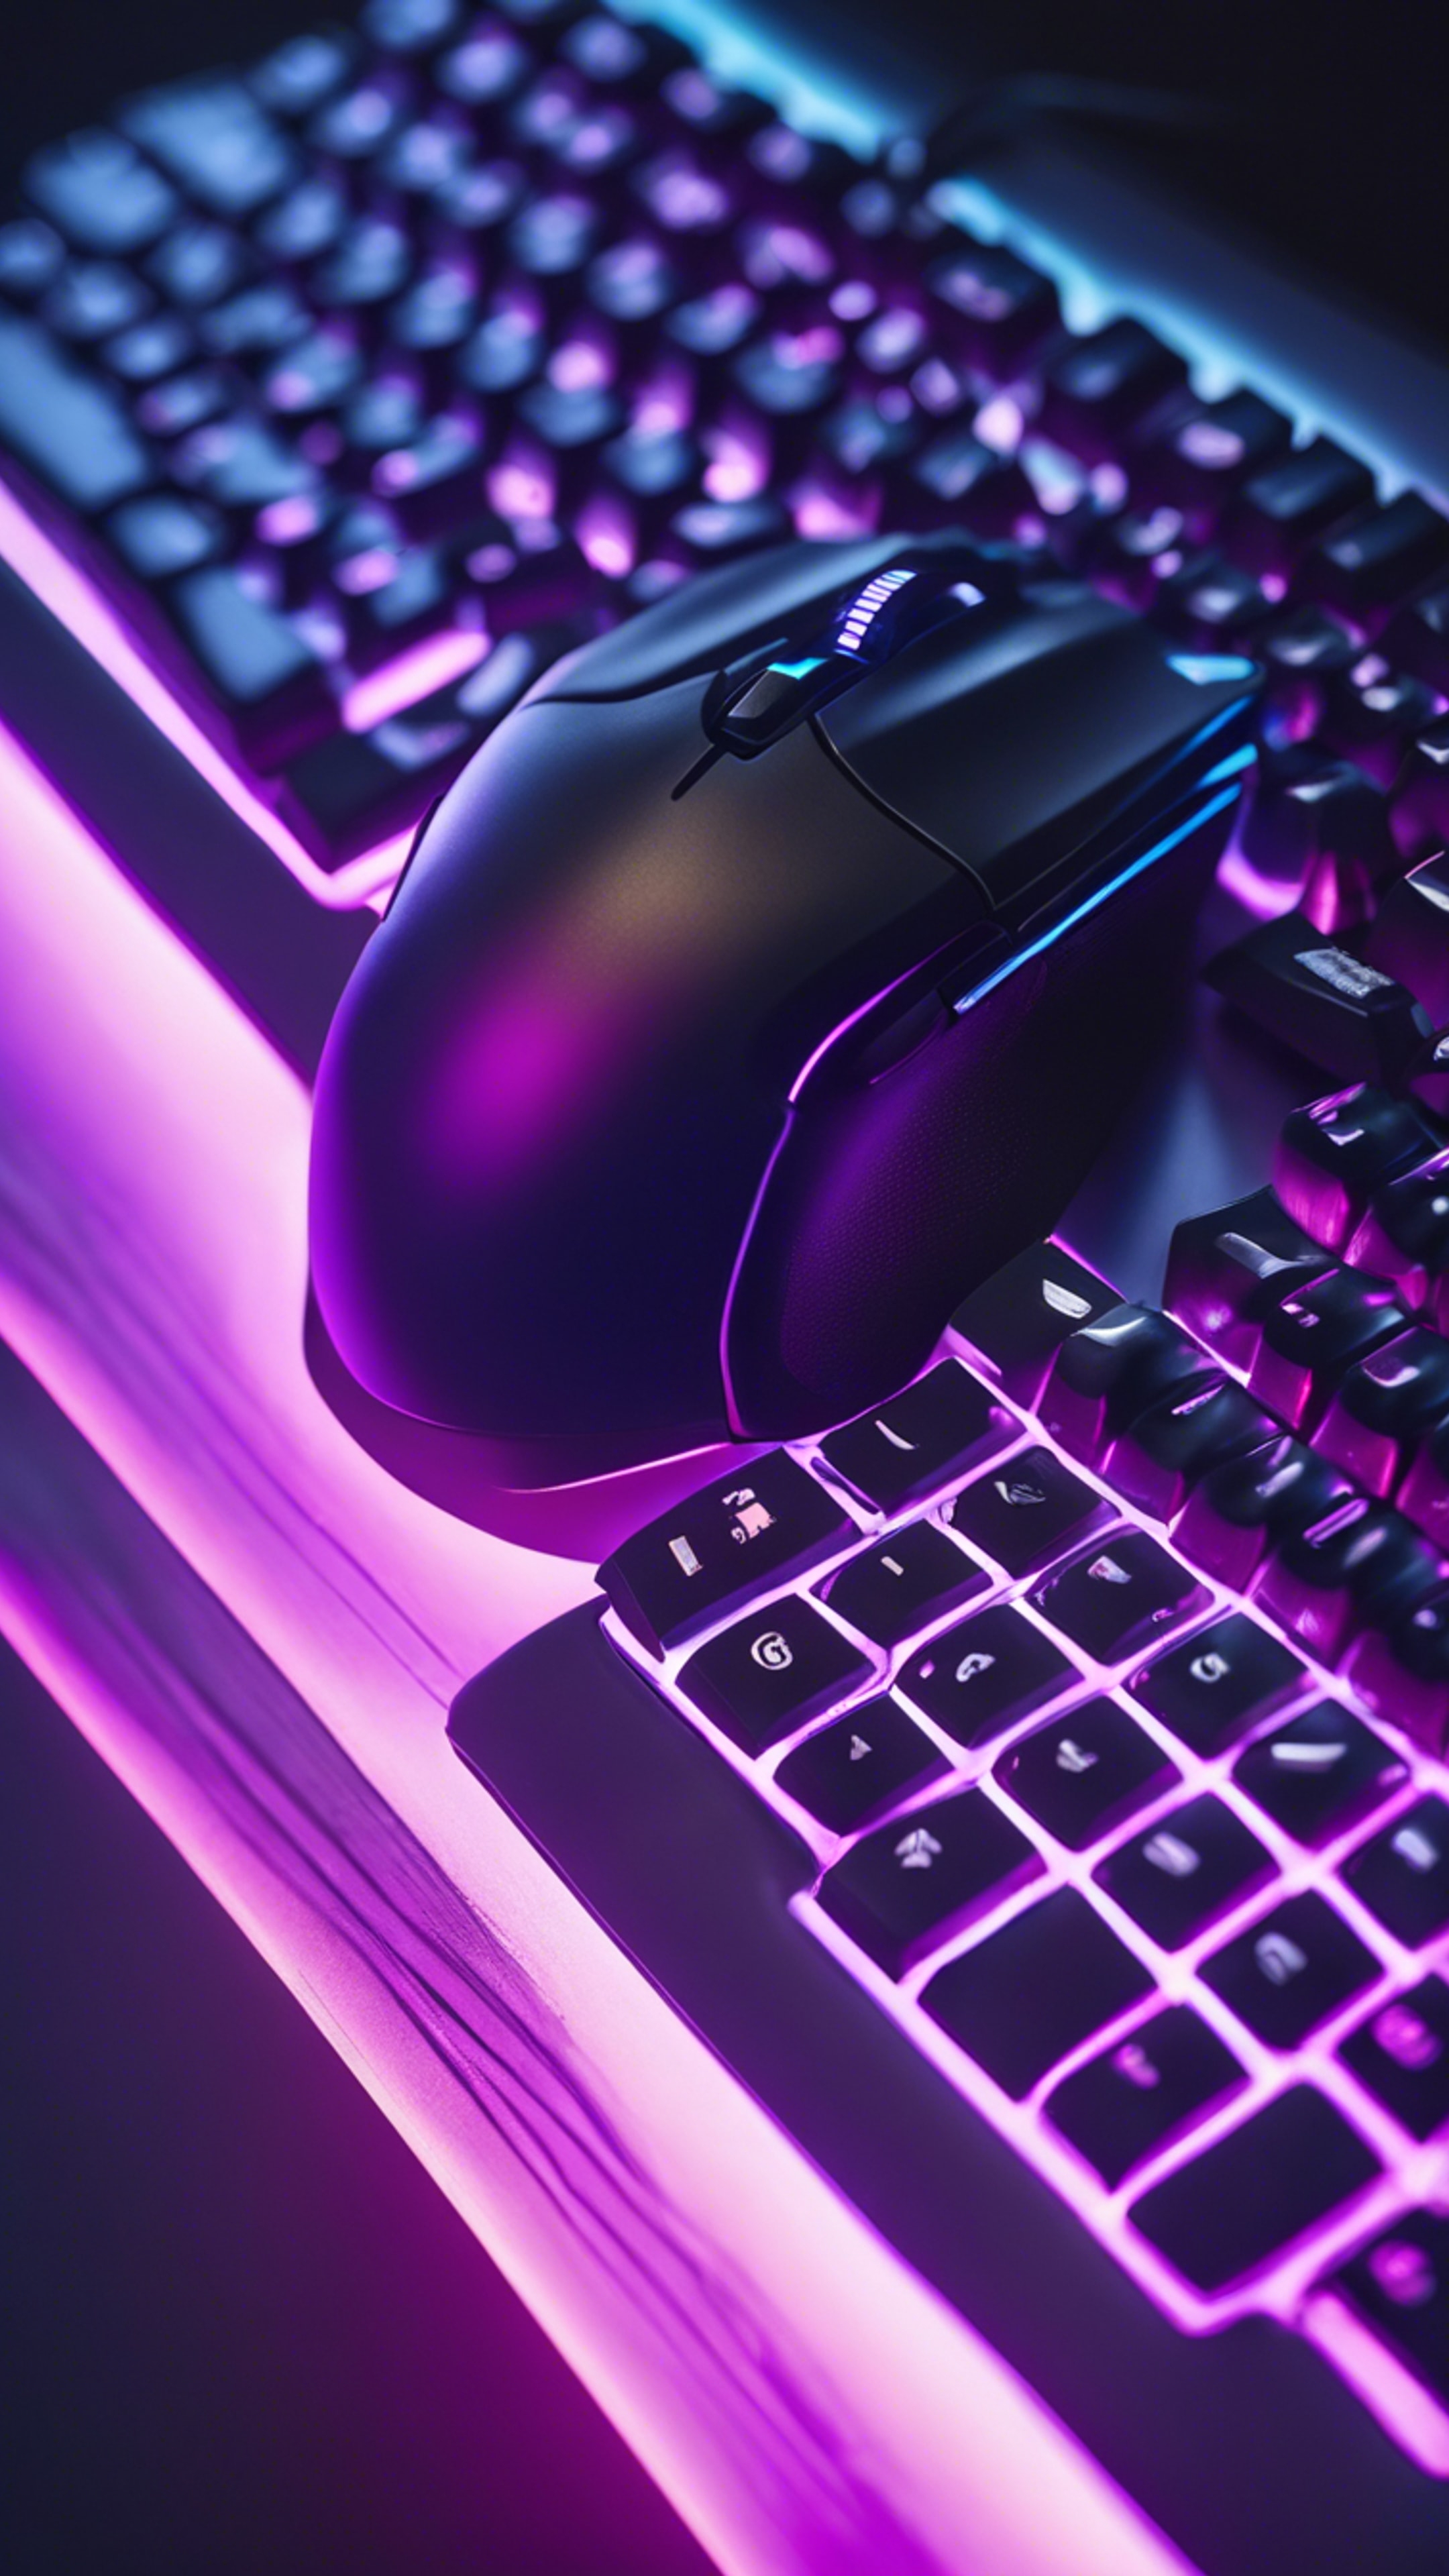 A top down view of a gaming keyboard and mouse bathed in a soothing gradient of blue to purple backlighting. Tapeta[d1c9d3144afe4da3b536]